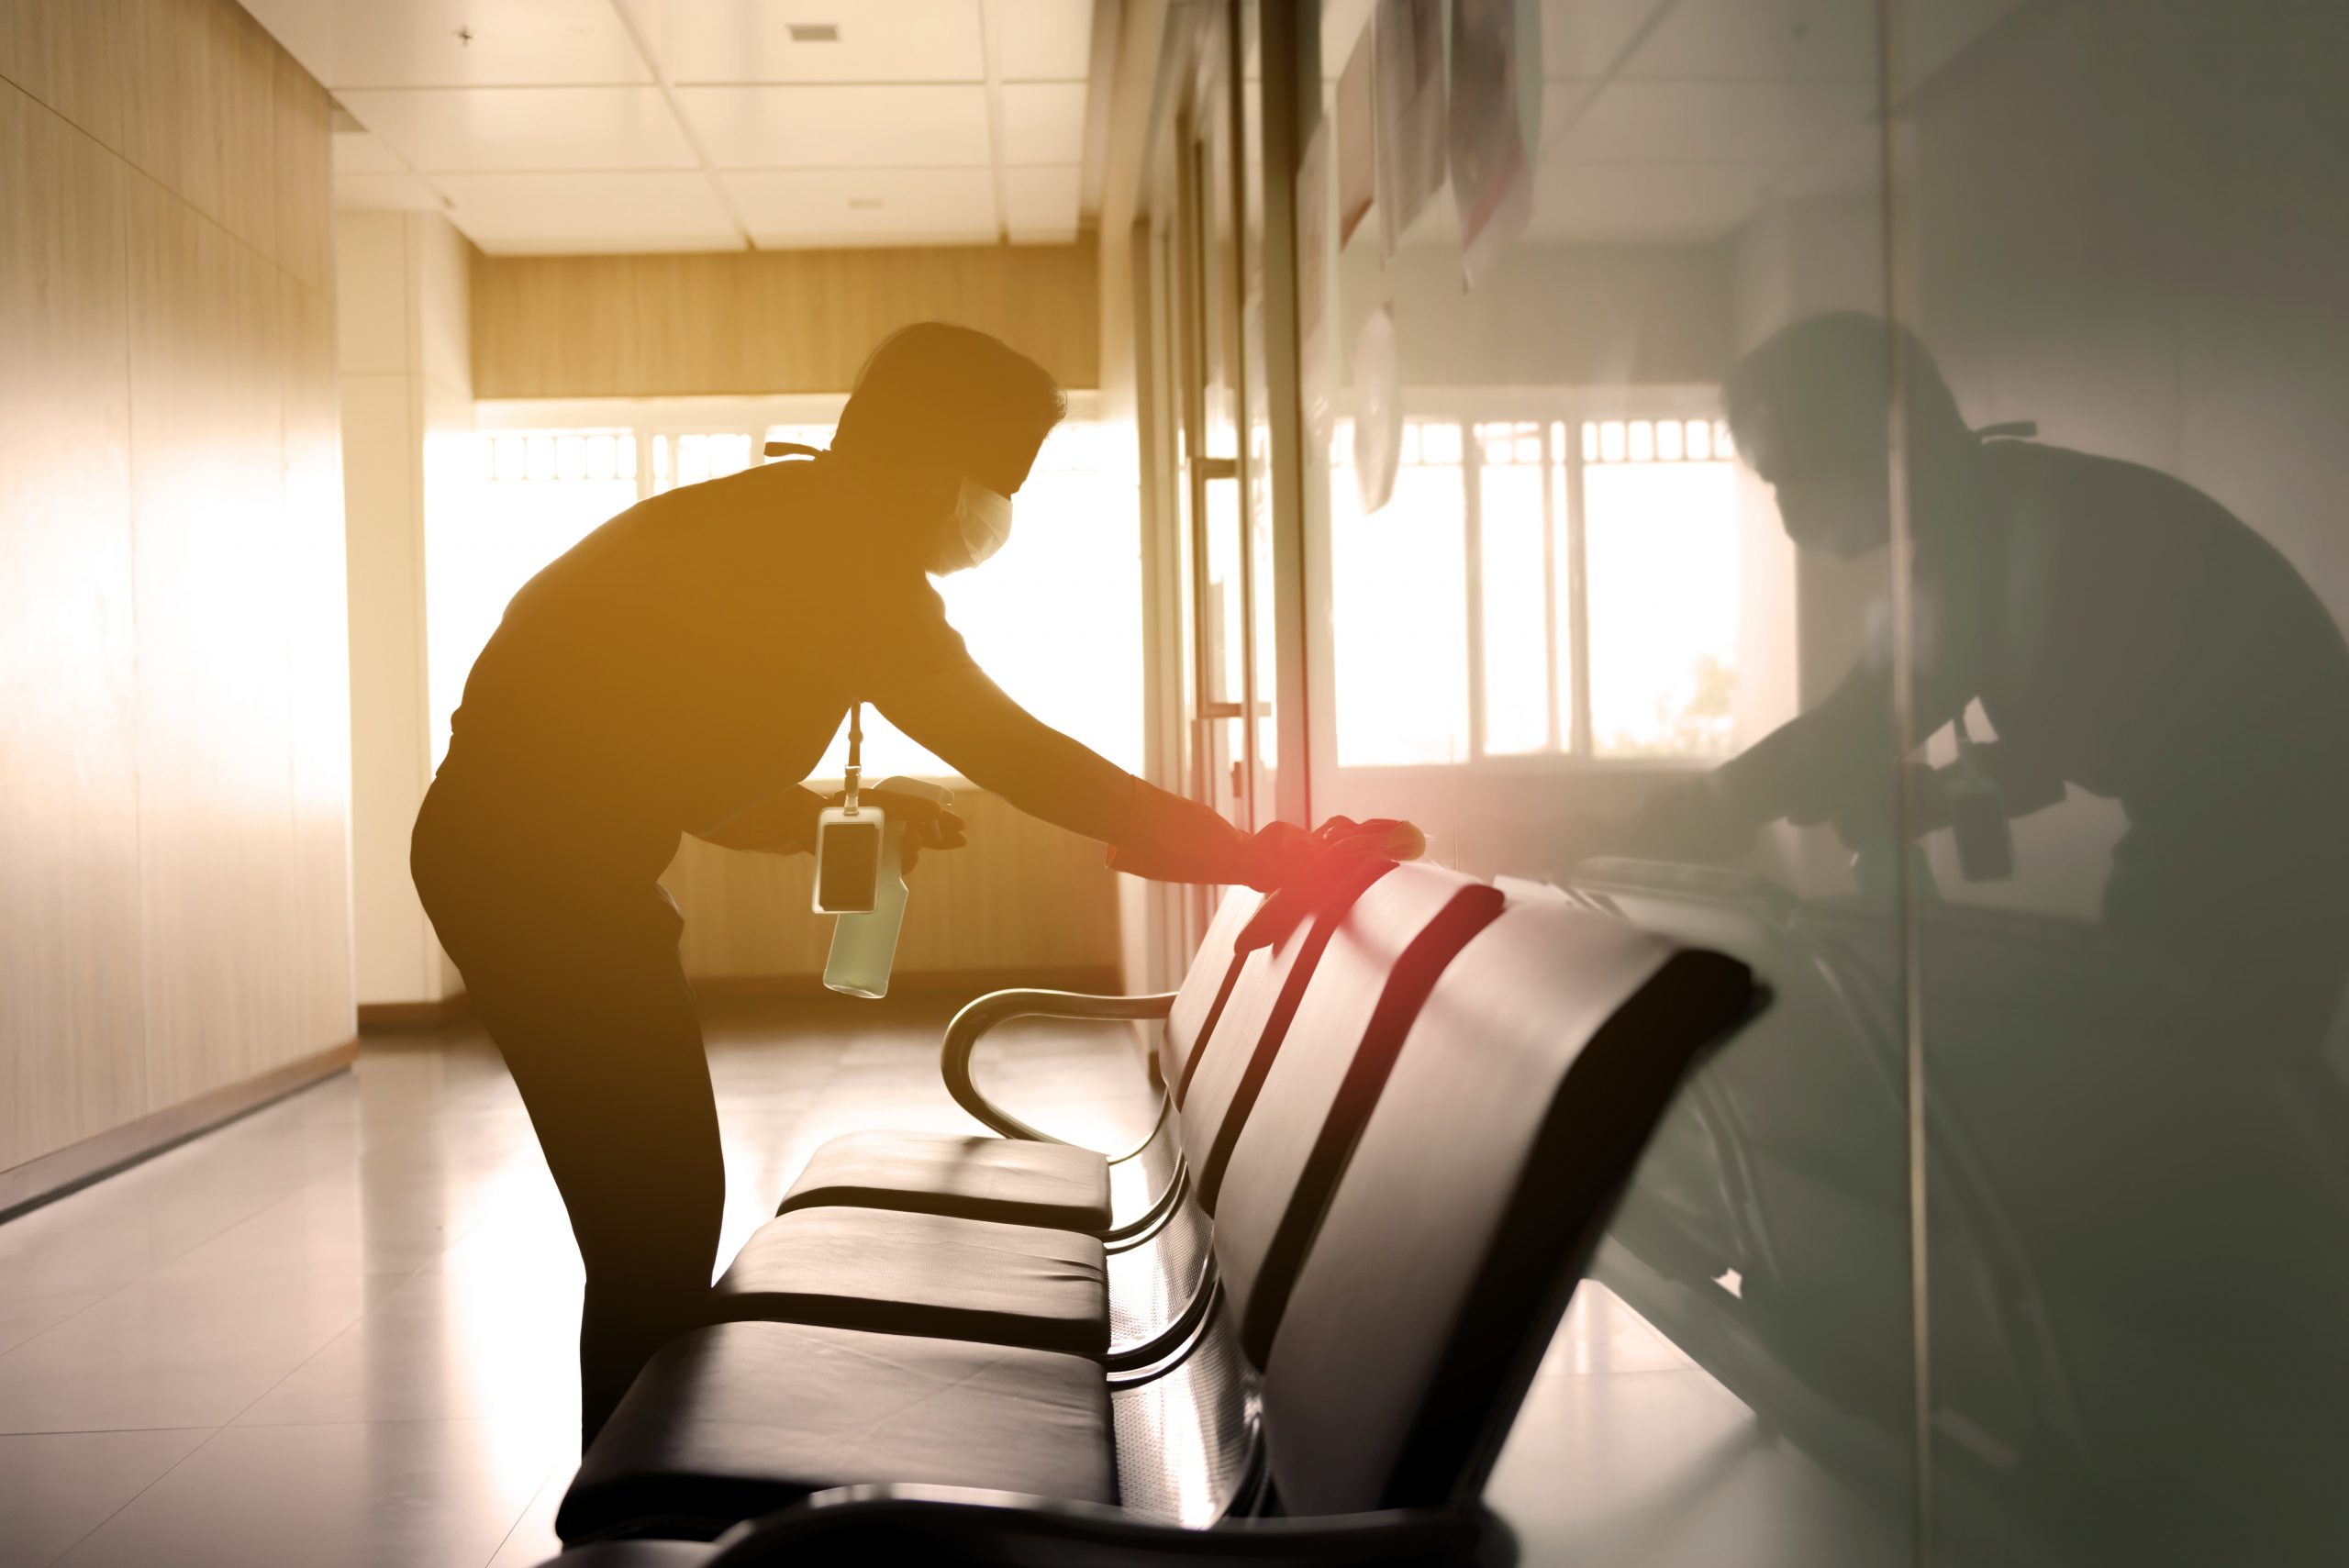 blog image of a worker disinfecting an office space